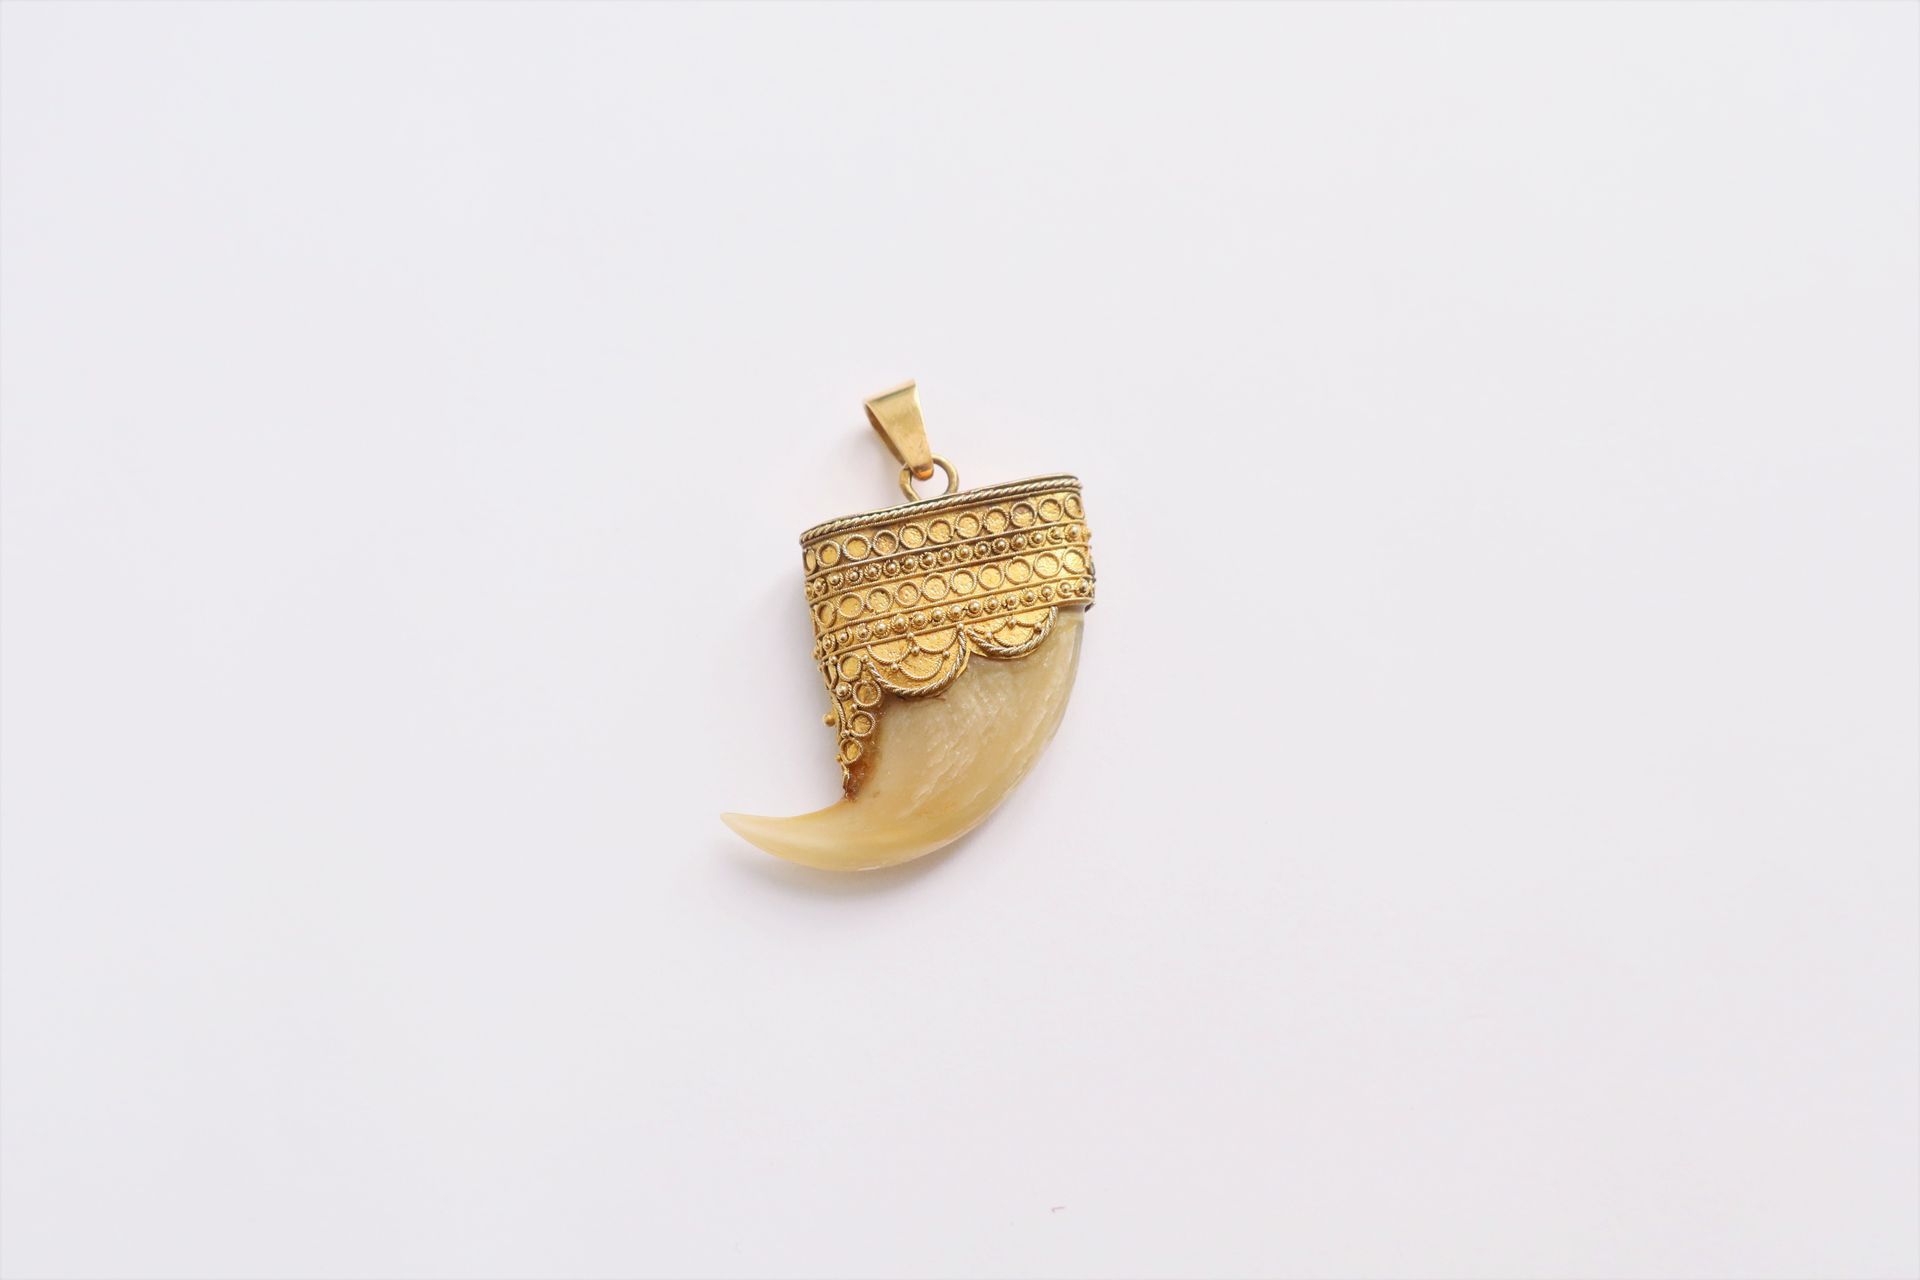 Null Pendant made of a wild animal claw mounted in 14K (585) gold. Gross weight &hellip;